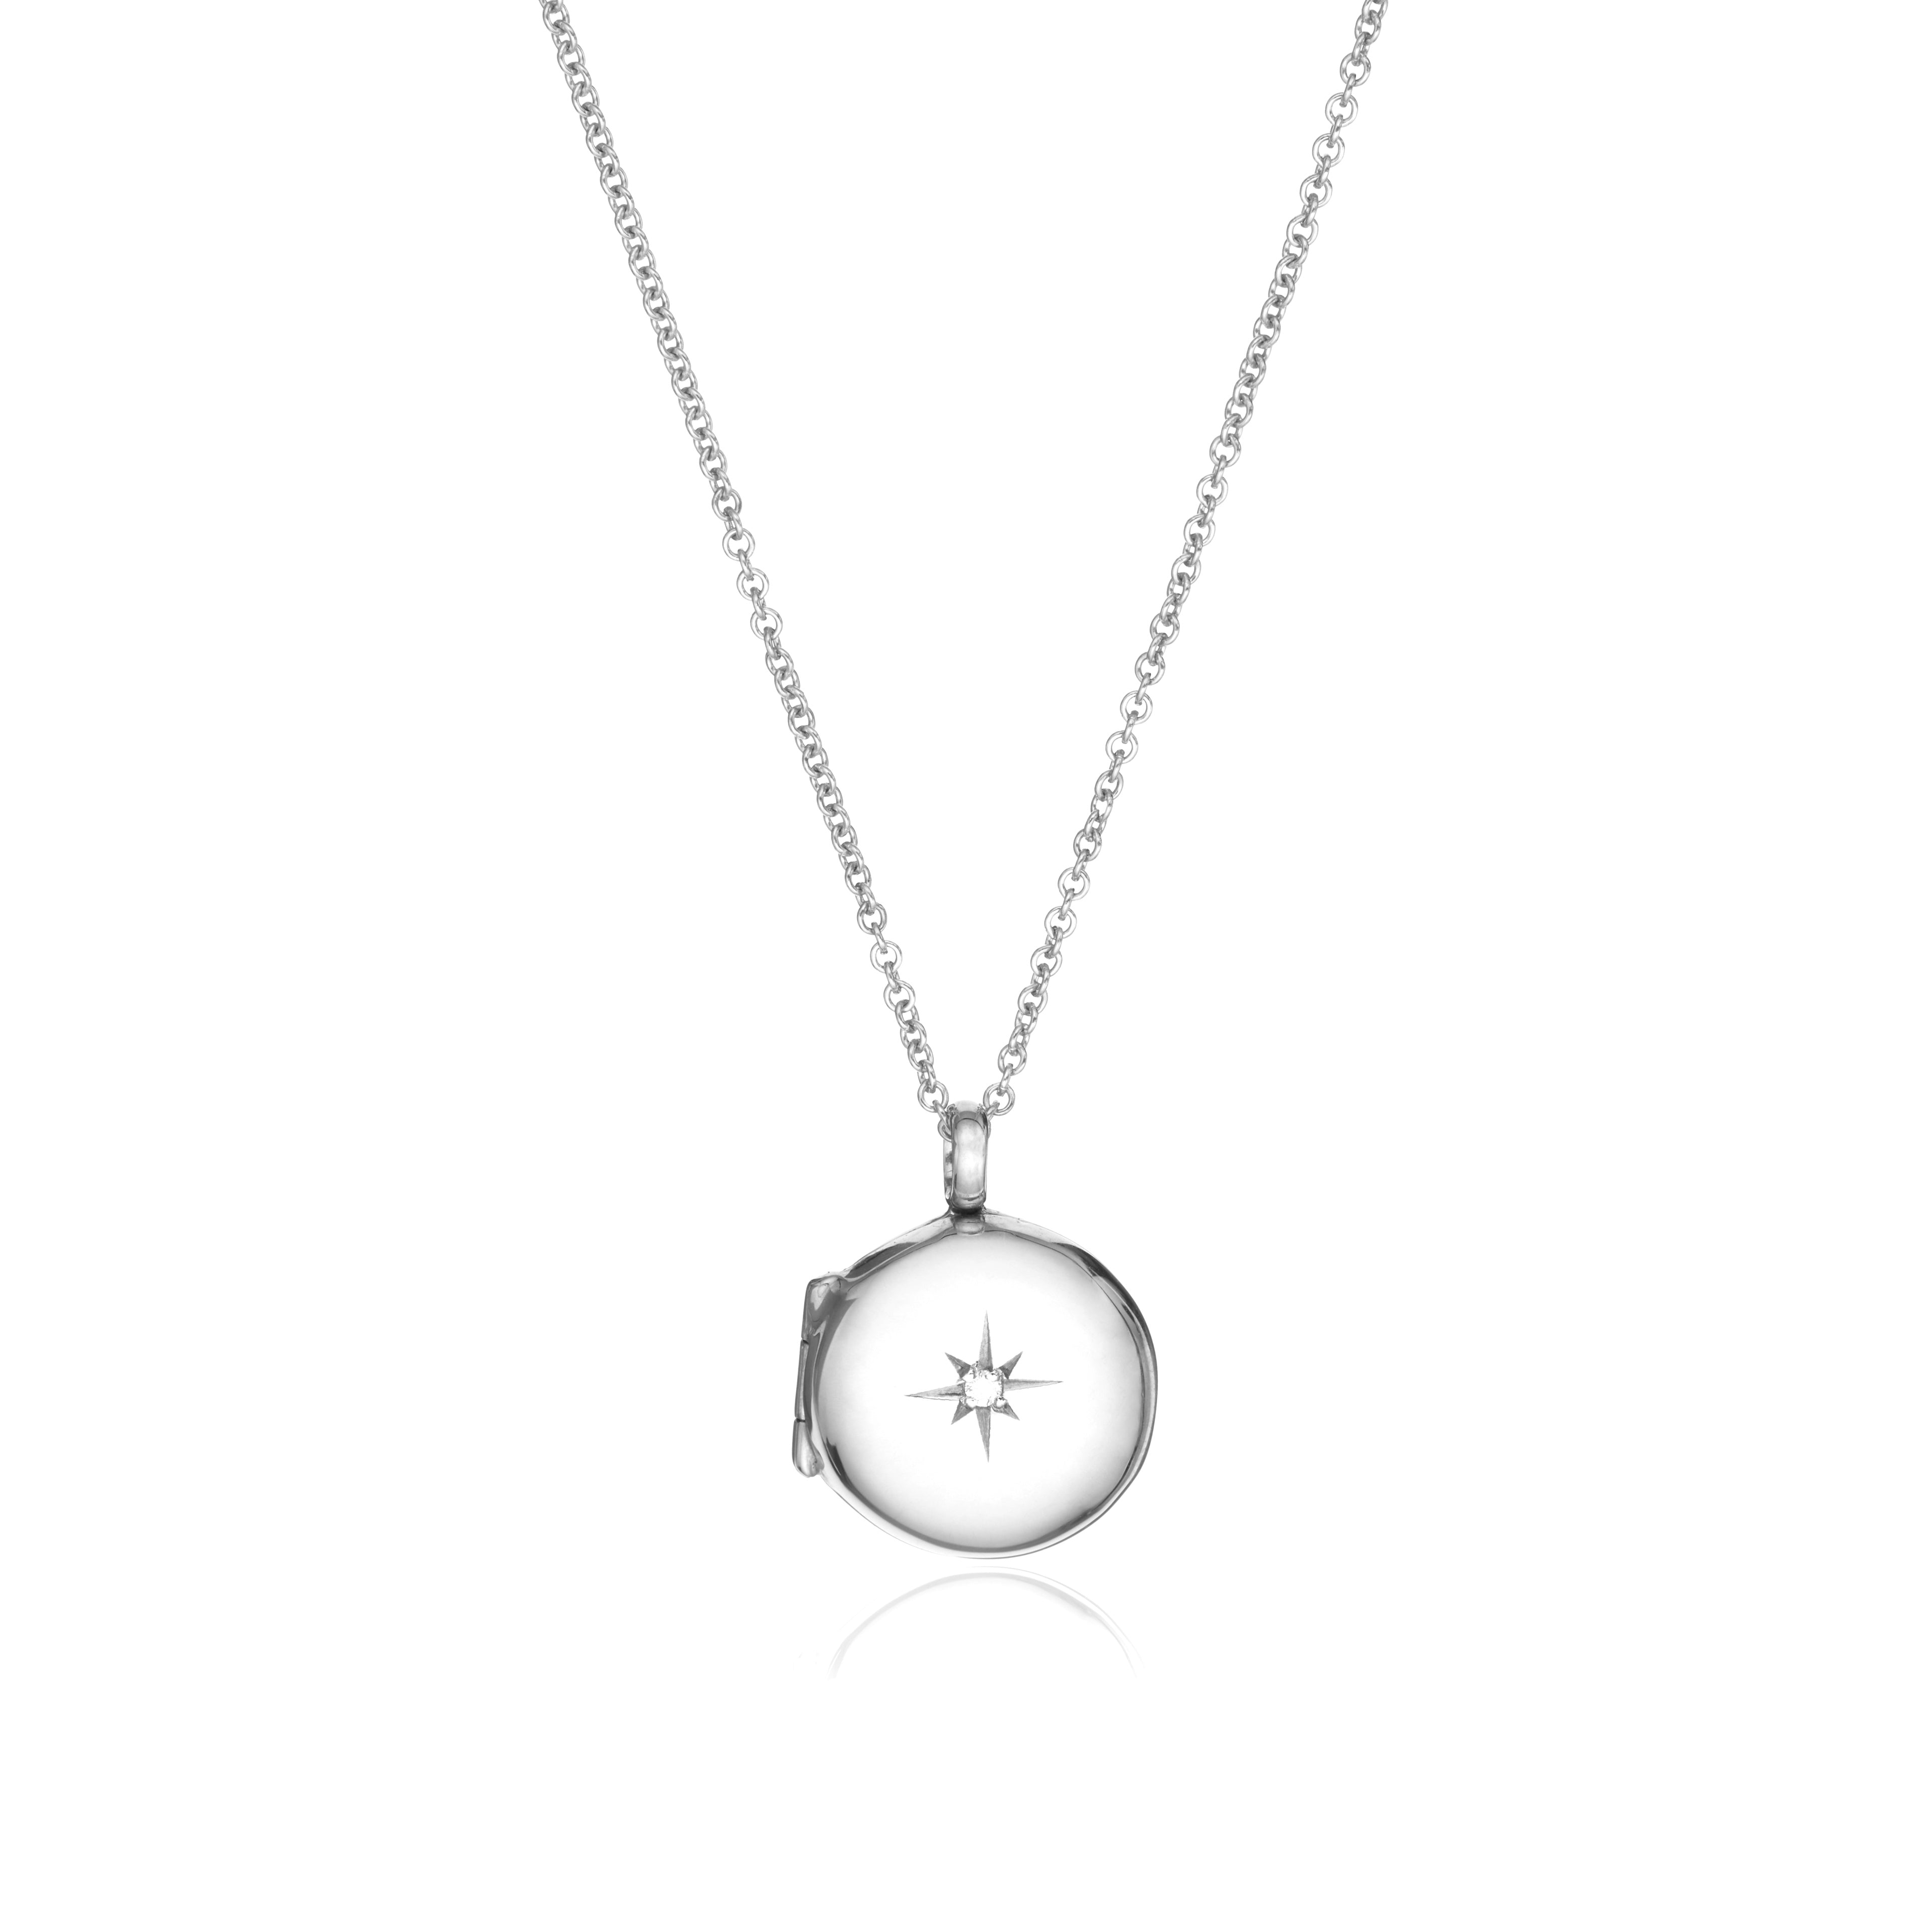 Silver small round diamond locket necklace on a white background